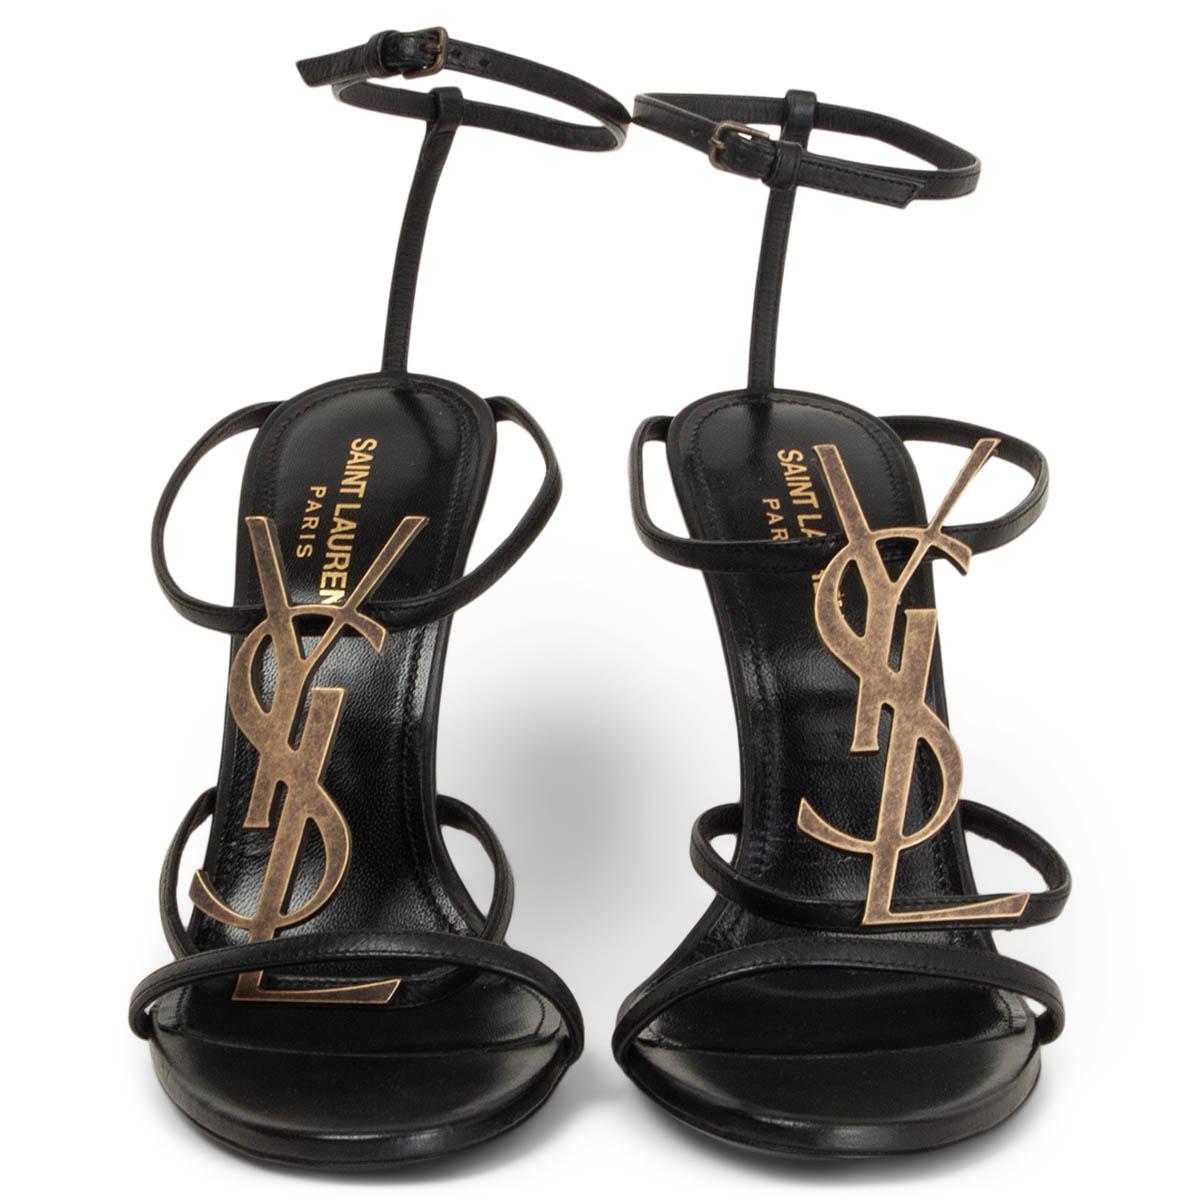 100% authentic Saint Laurent Cassandra YSL logo ankle-strap sandals in black leather and antique gold-tone hardware. Brand new. 

Measurements
Imprinted Size	38
Shoe Size	38
Inside Sole	25cm (9.8in)
Width	8cm (3.1in)
Heel	12cm